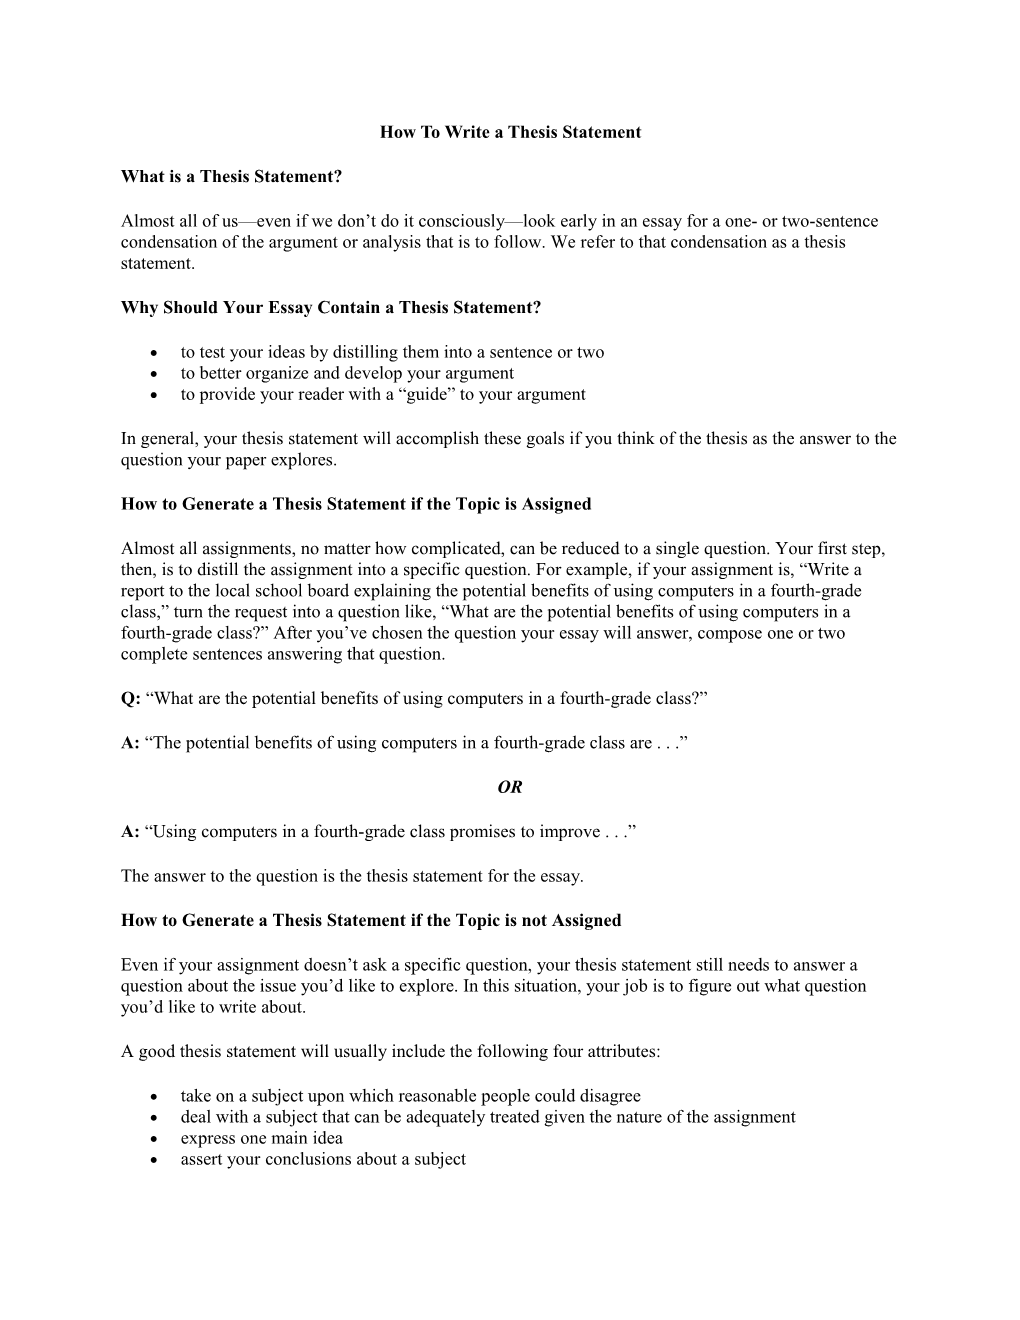 How To Write A Thesis Statement